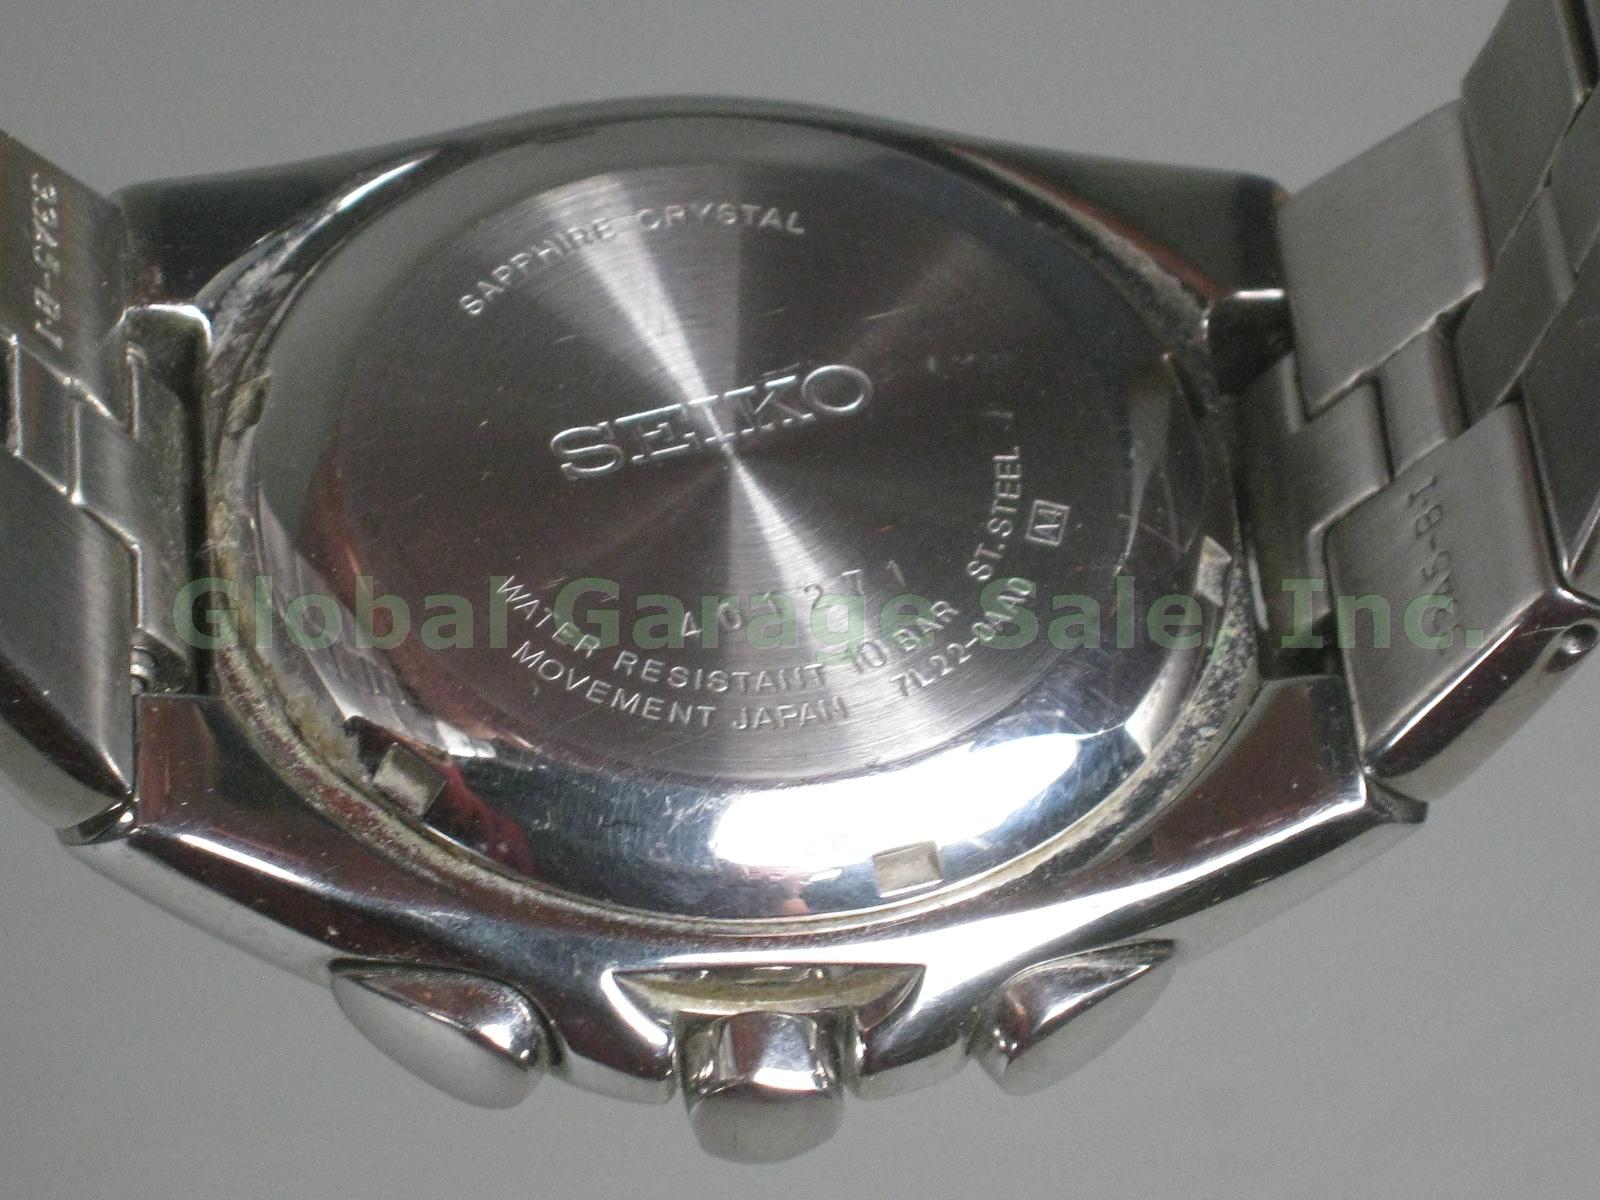 Seiko Arctura Kinetic Chronograph Watch Sapphire Crystal Stainless 7L22-0AA0 NR! 9